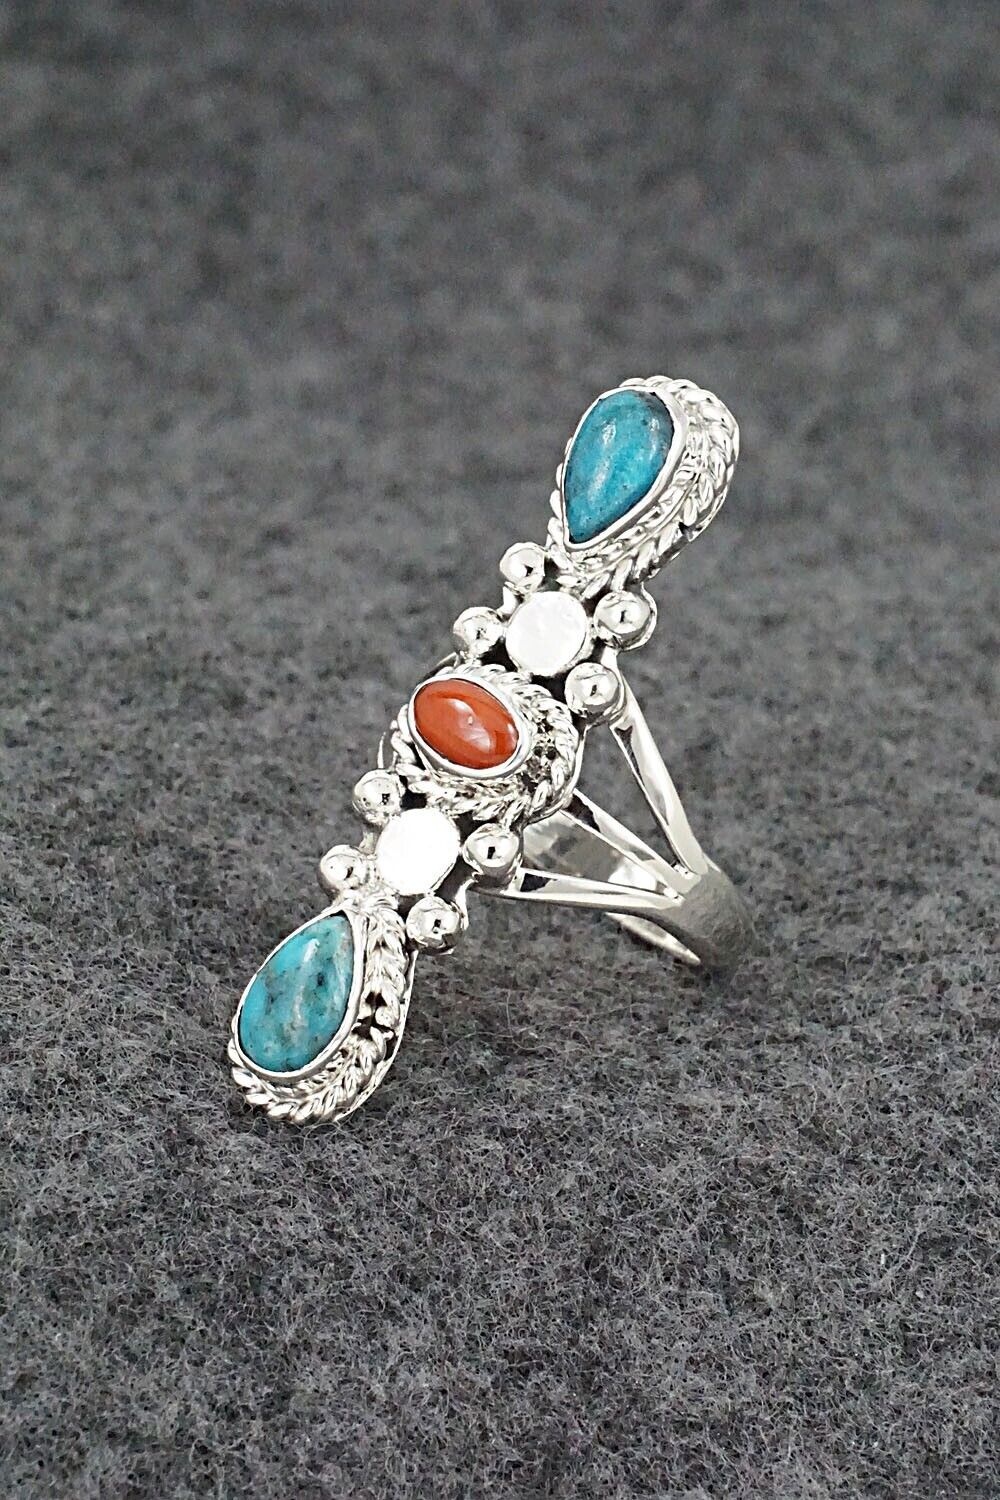 Turquoise, Coral & Sterling Silver Ring - Andrew Vandever - Size 7